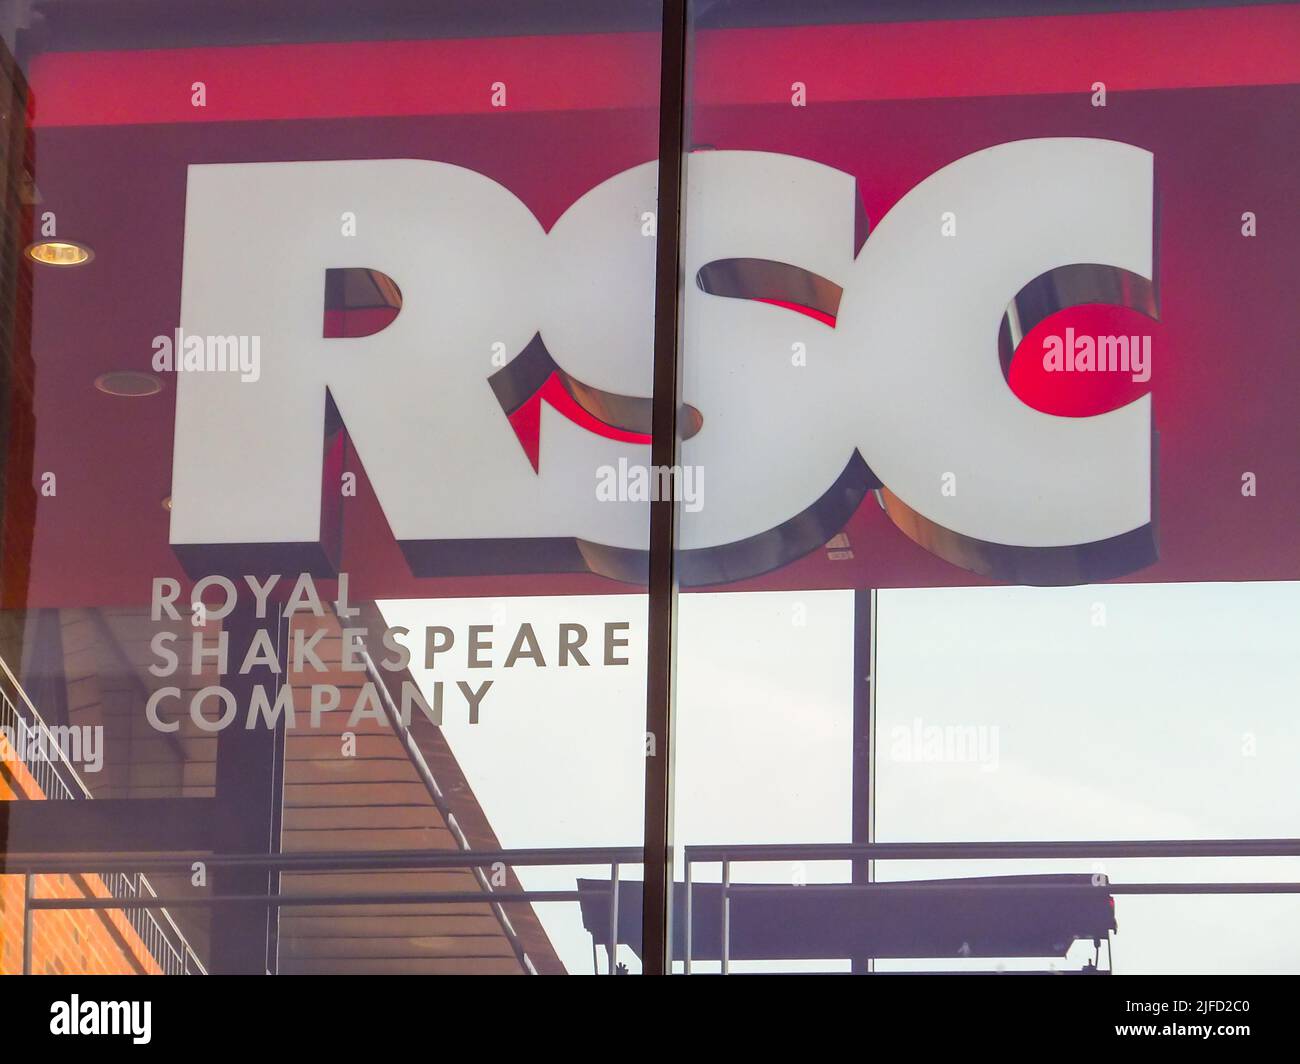 The Royal Shakespeare Company logo in their window in Stratford-upon-Avon, Warwickshire, England, UK. Stock Photo